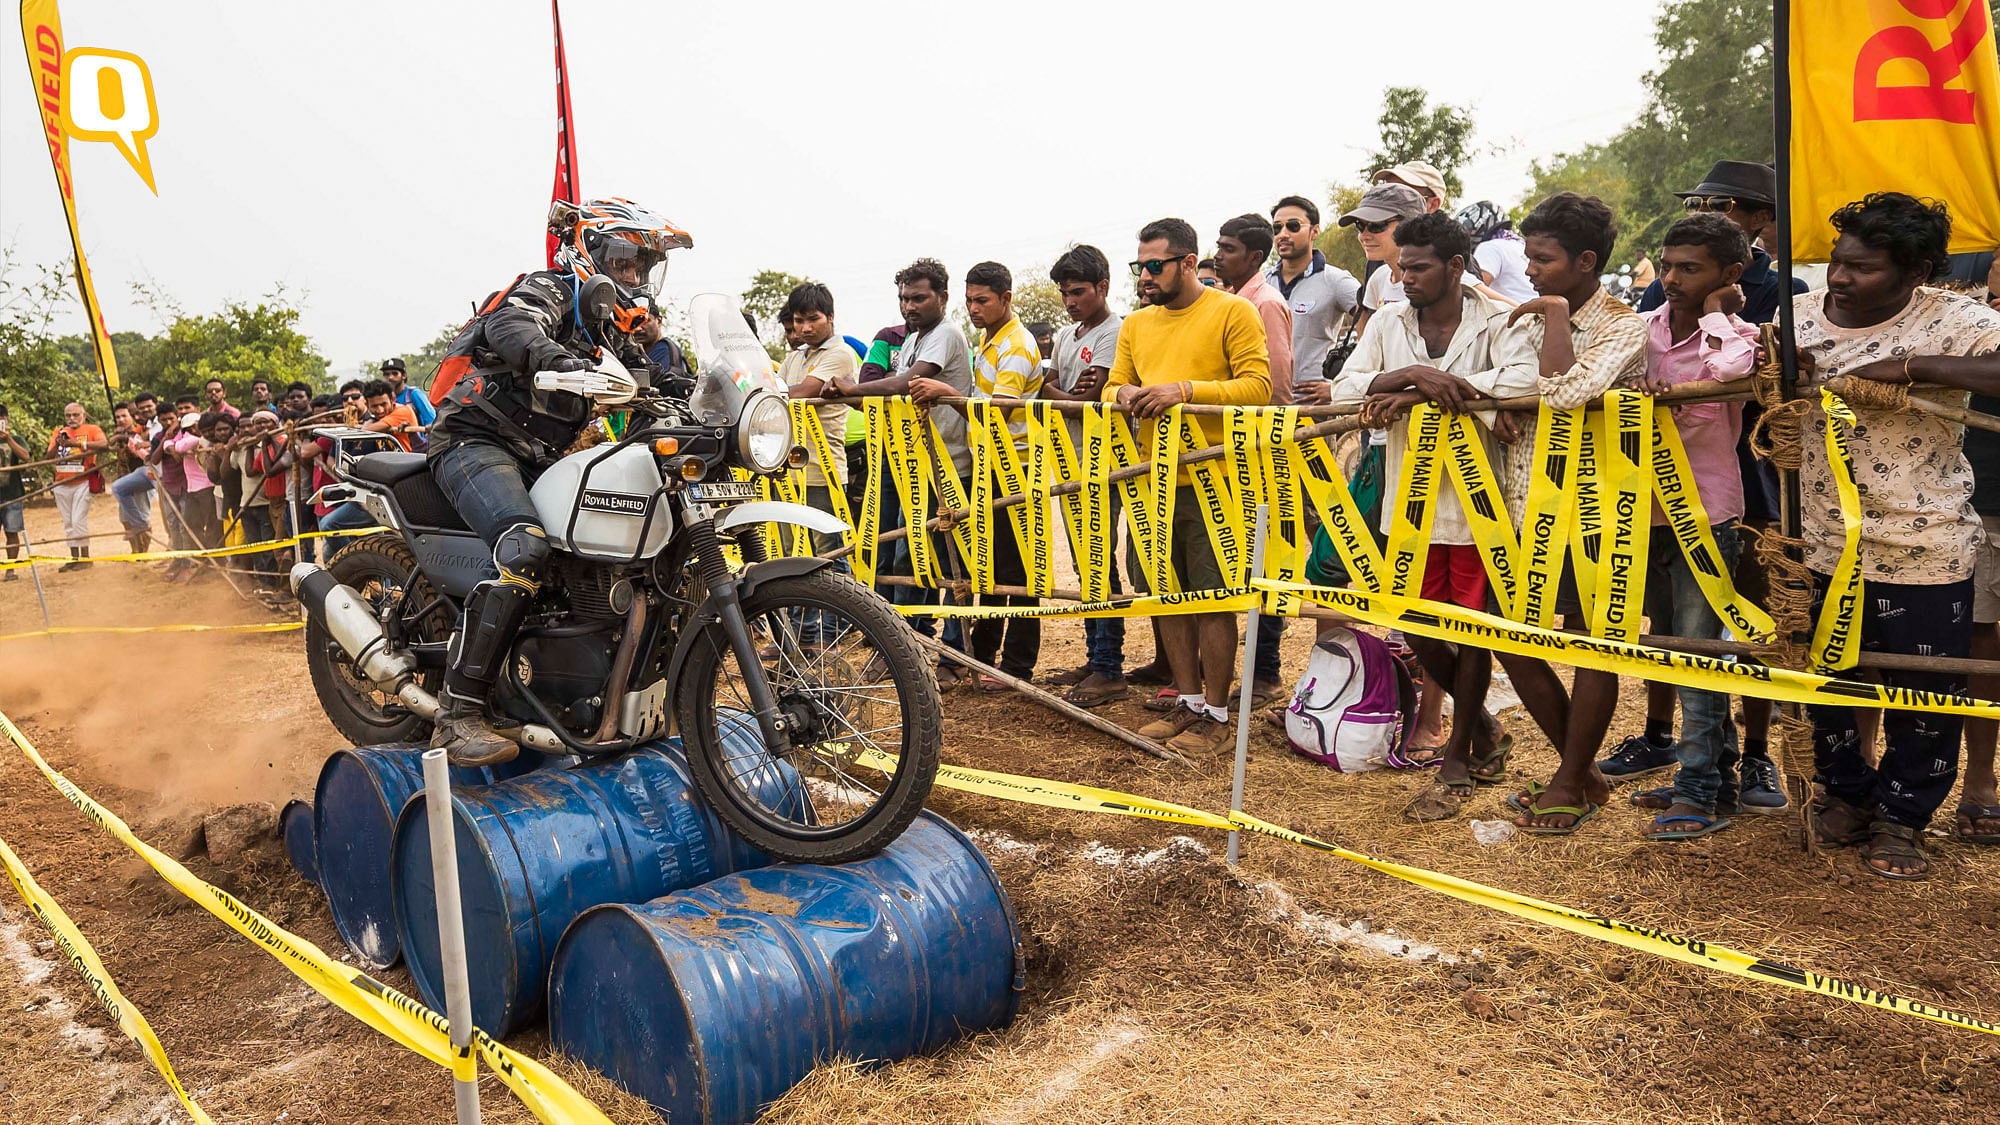 Royal Enfield  RiderMania 2016 was apparently the biggest one ever. (Photo: Royal Enfield)